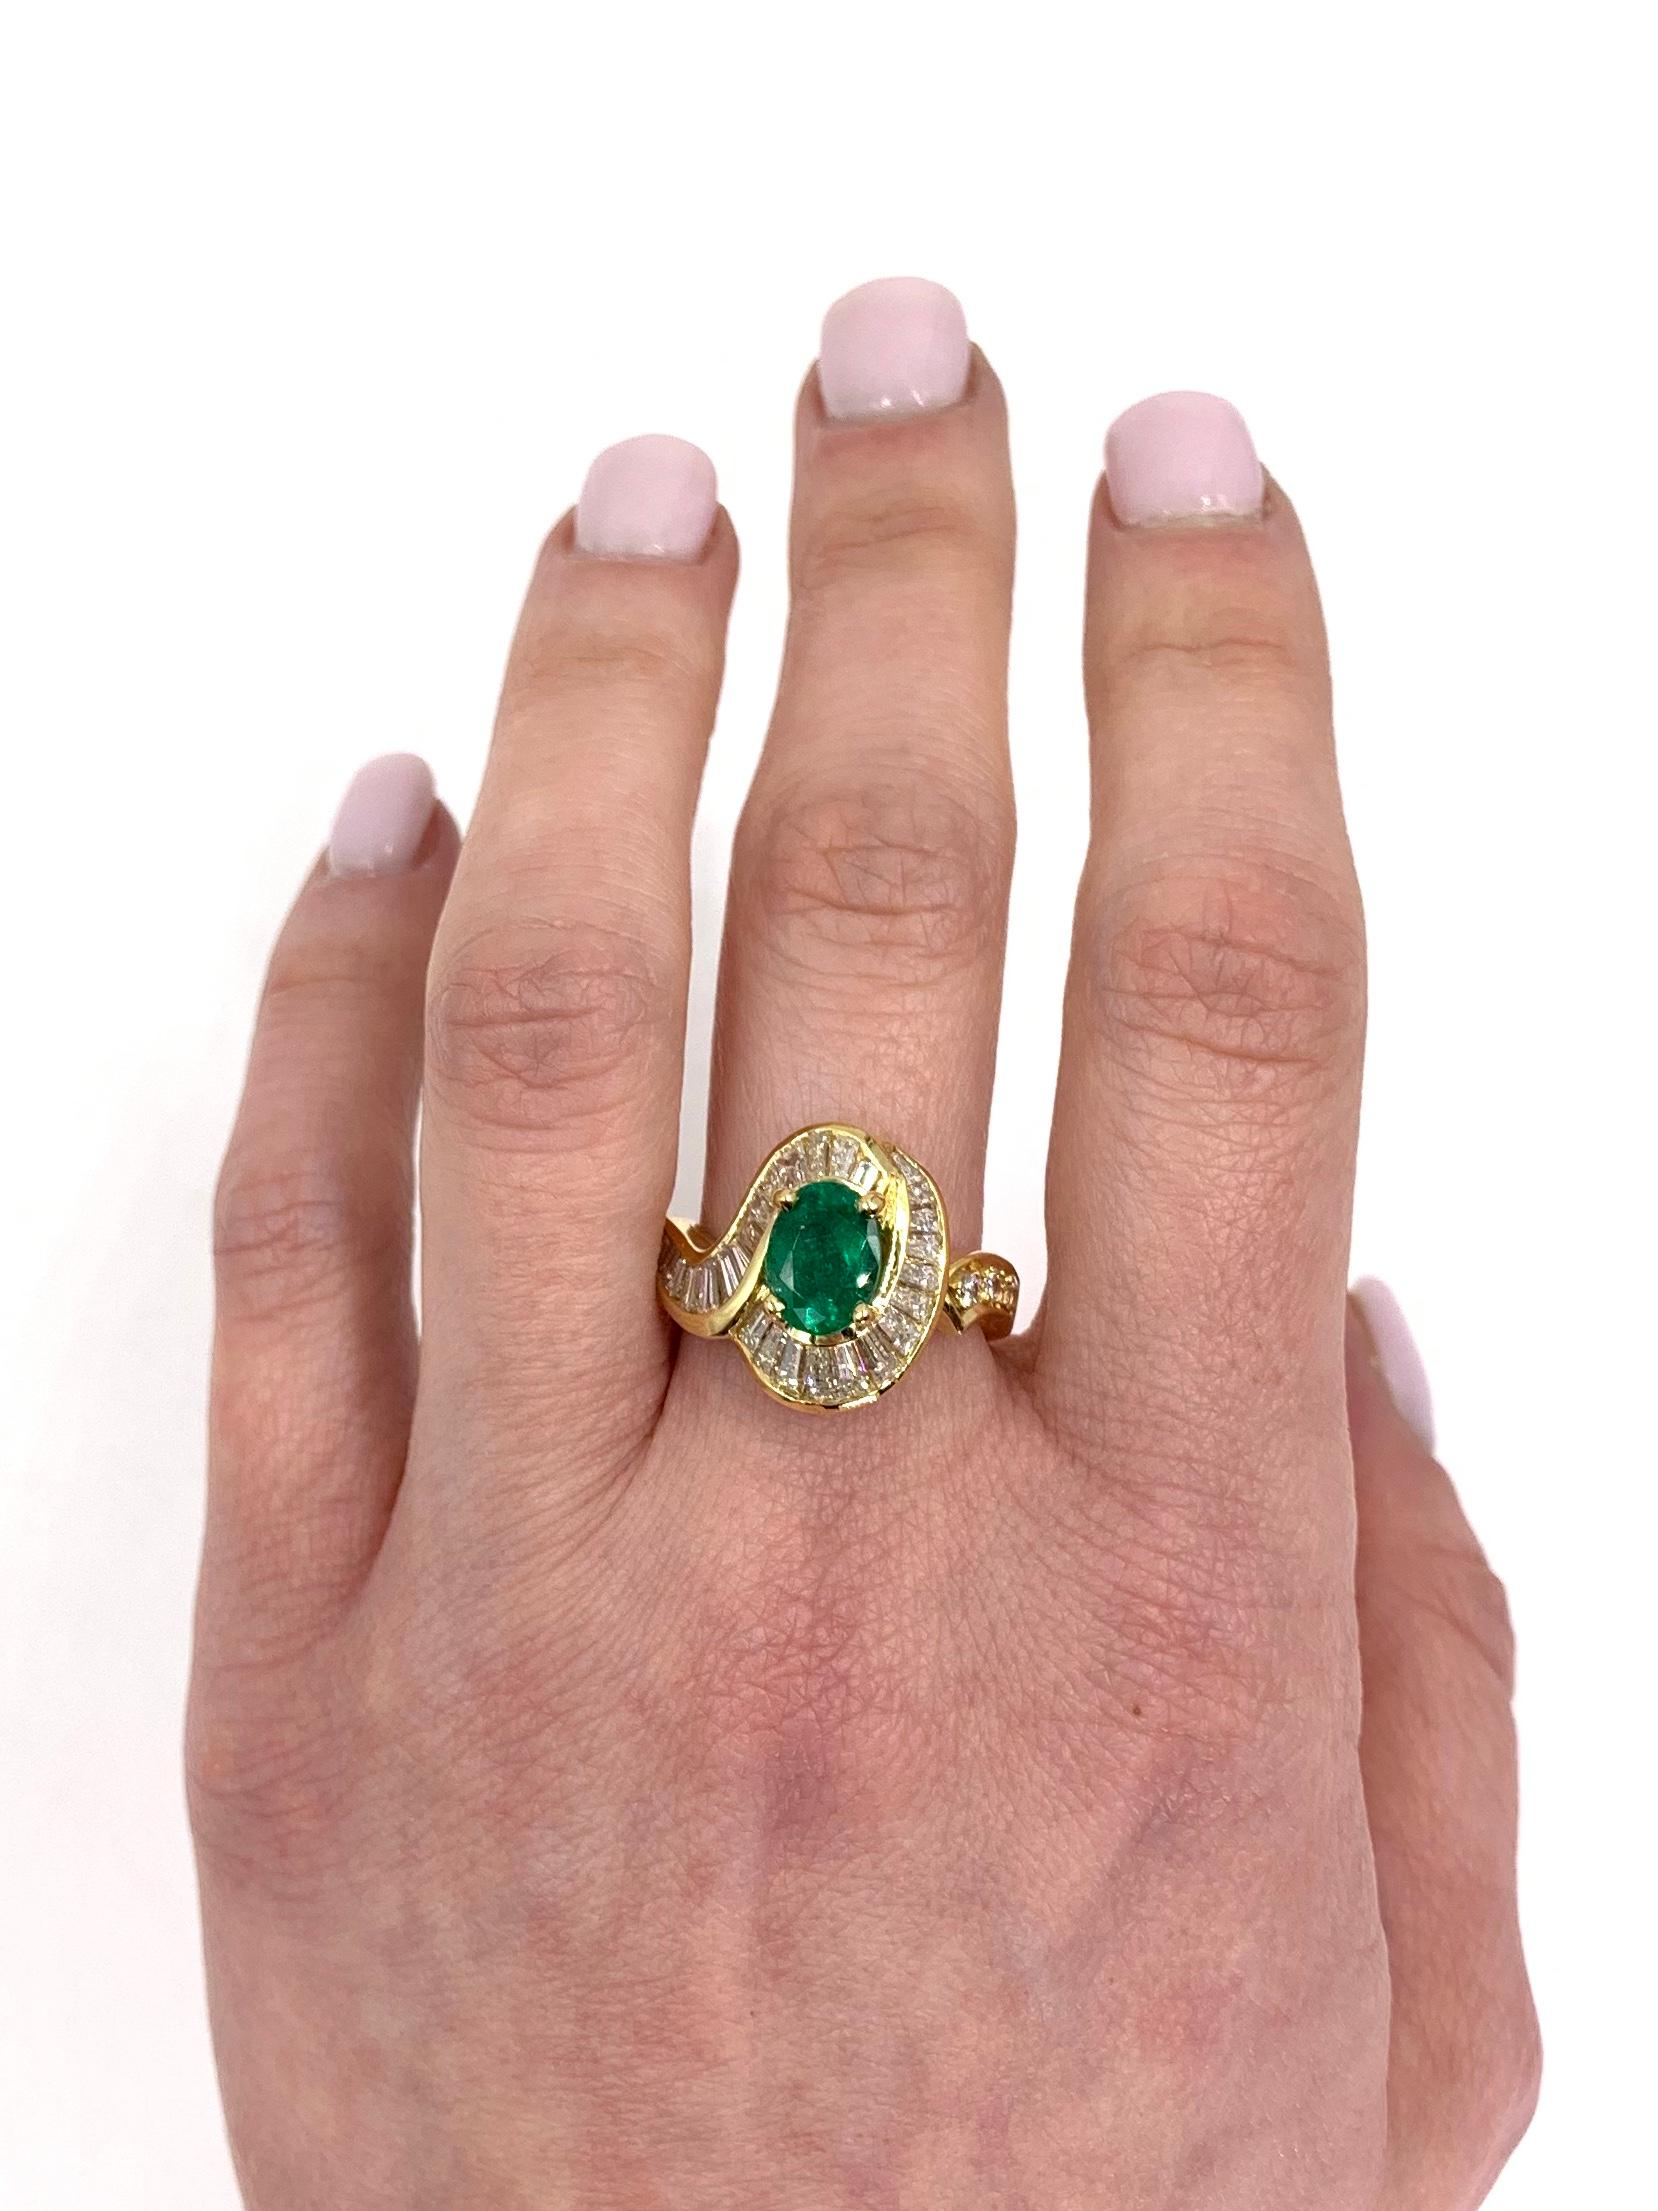 18 Karat yellow gold unique modern ring featuring a 1.22 carat oval genuine emerald surrounded by channel set baguette diamonds and accented with 3 round brilliant diamonds. Diamond total weight is 1.90 carats at approximately G-H color, VS2